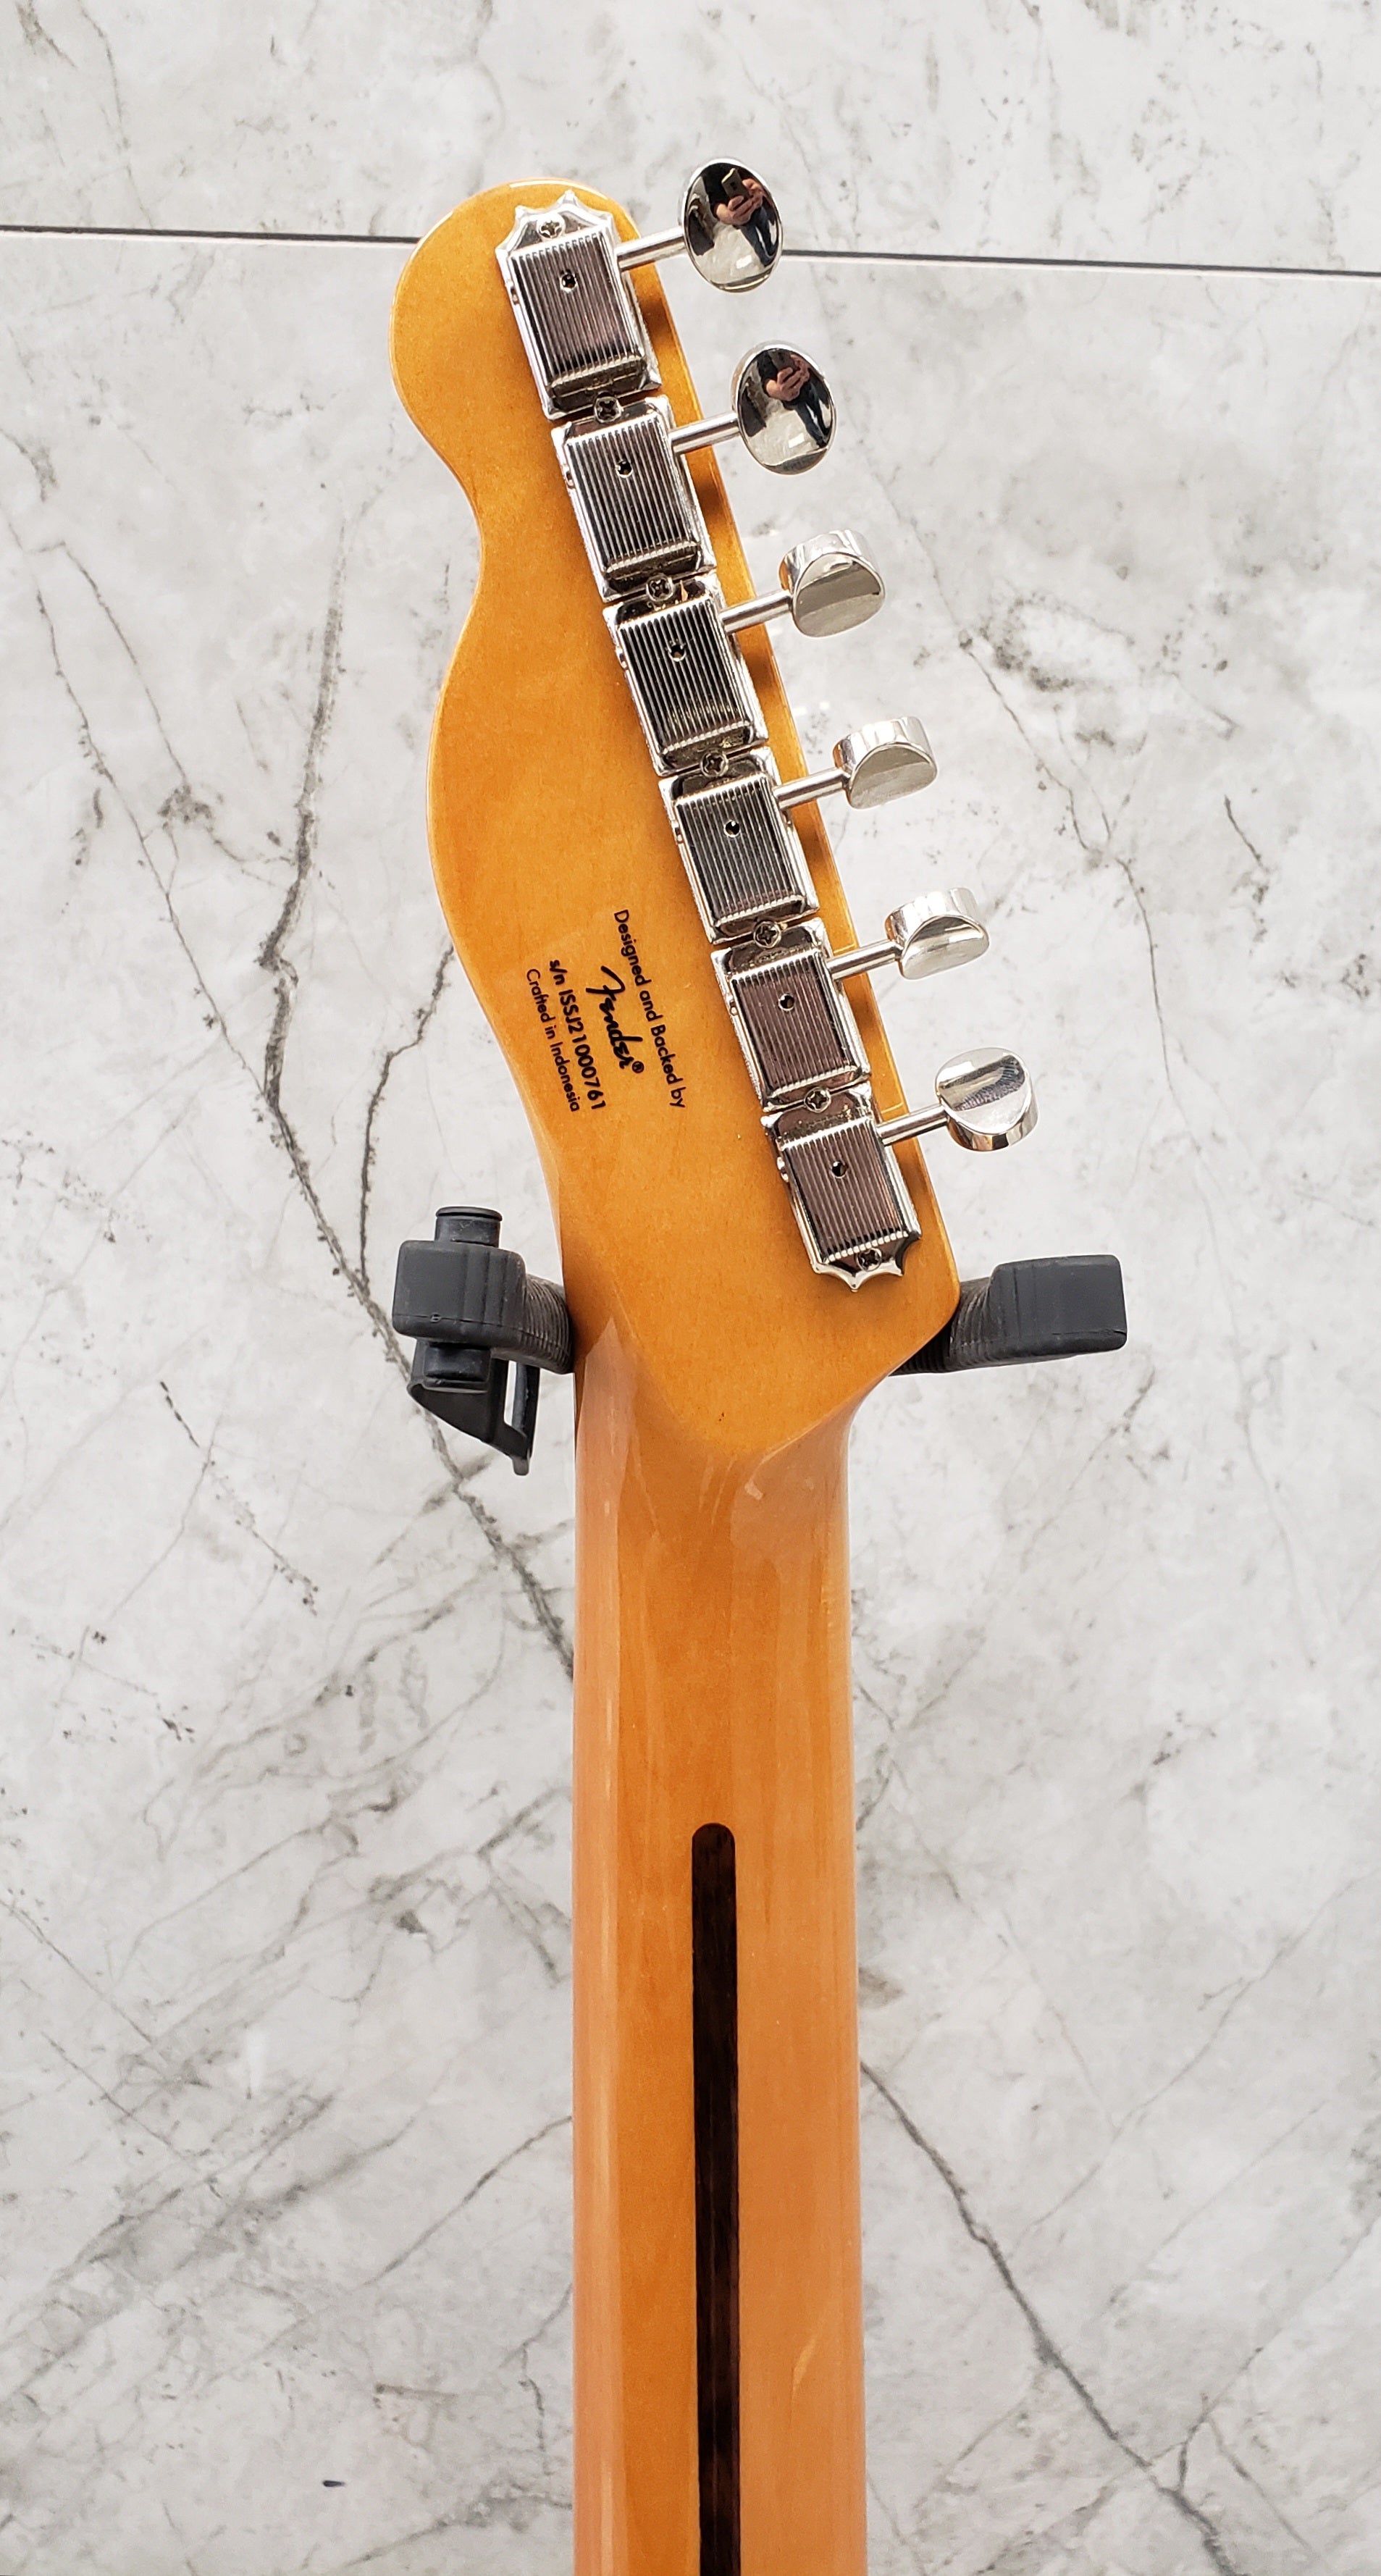 Squier Classic Vibe 50s Telecaster Maple Fingerboard Butterscotch Blonde 0374030550 SERIAL NUMBER ISSJ21000761 - 8.6 LBS